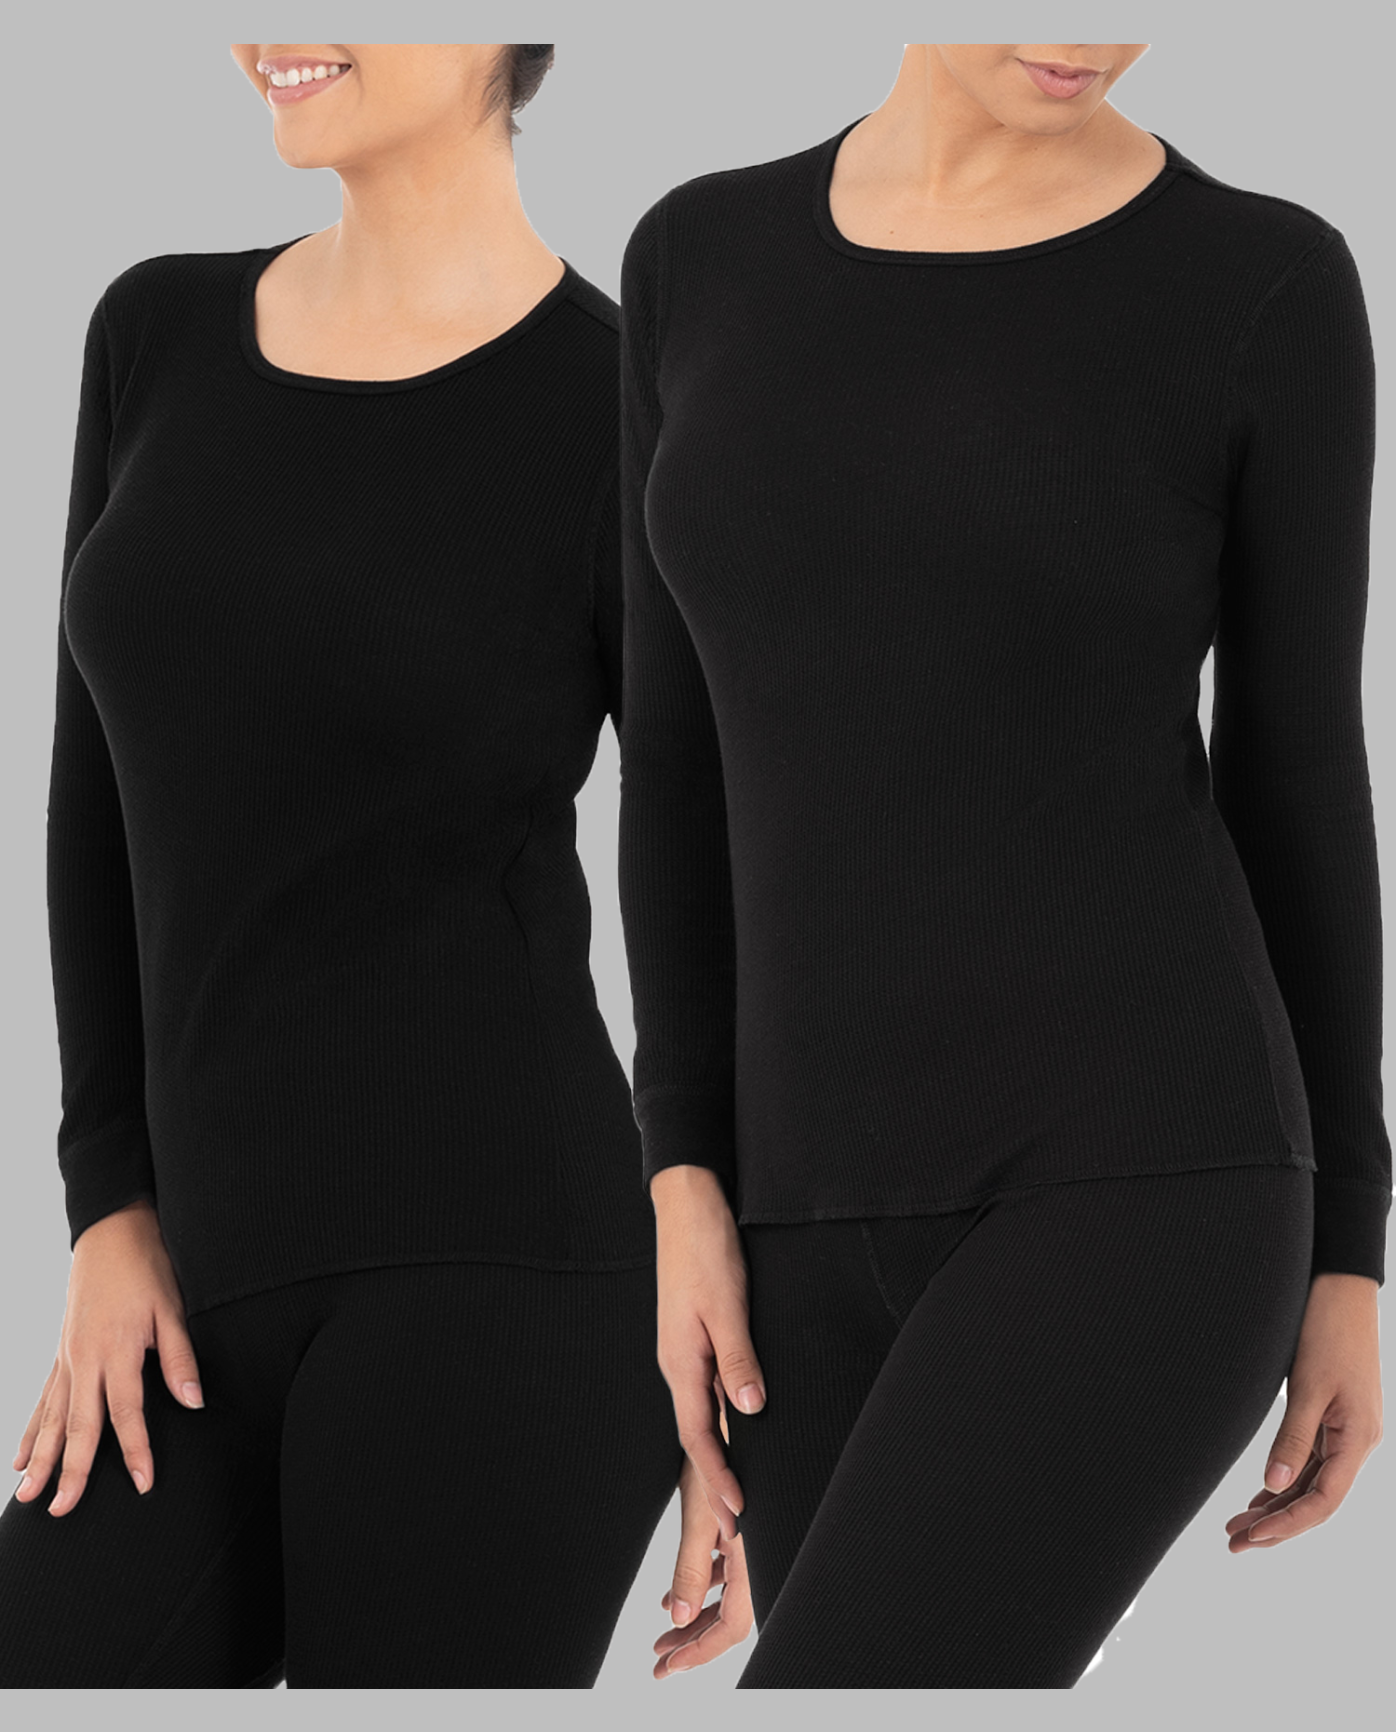 noun Clap exception Women's Thermal Crew Top | Fruit of the Loom Thermals